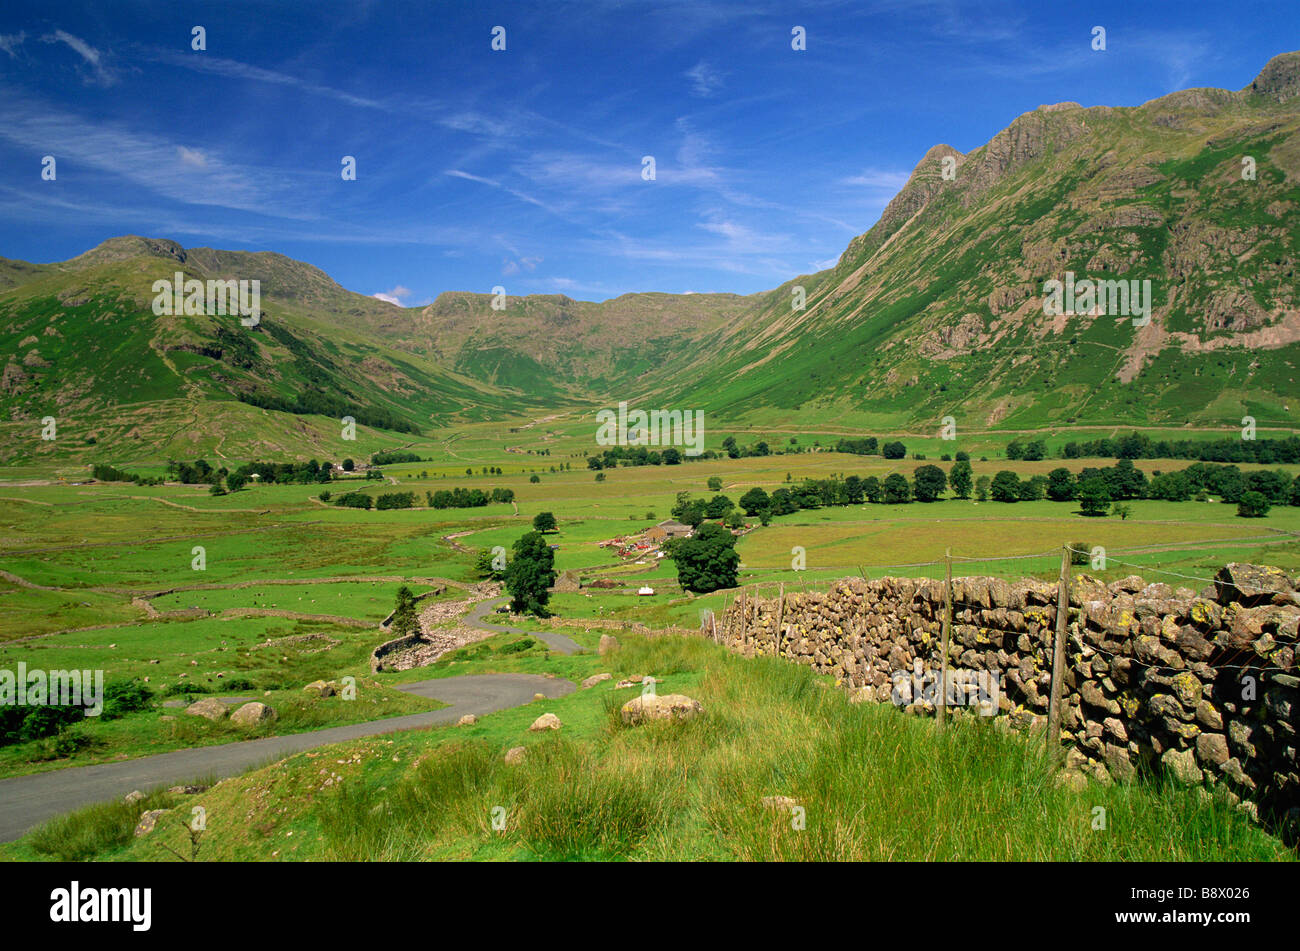 Panoramic view of mountains, Cumbrian Mountains, Great Langdale, English Lake District, Cumbria, England Stock Photo